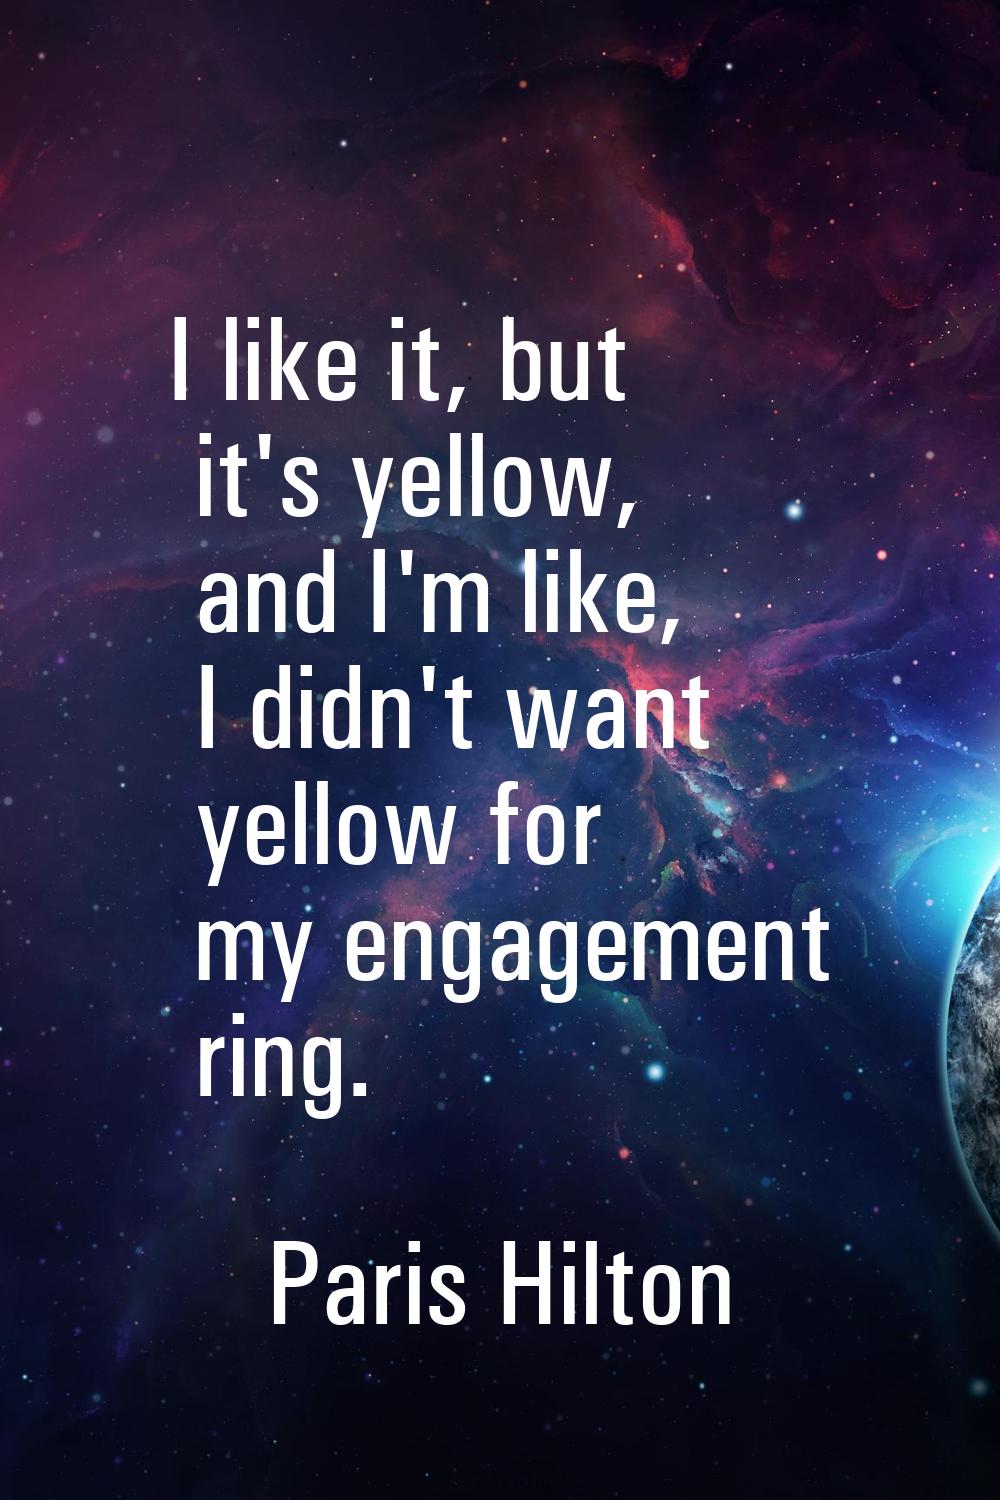 I like it, but it's yellow, and I'm like, I didn't want yellow for my engagement ring.